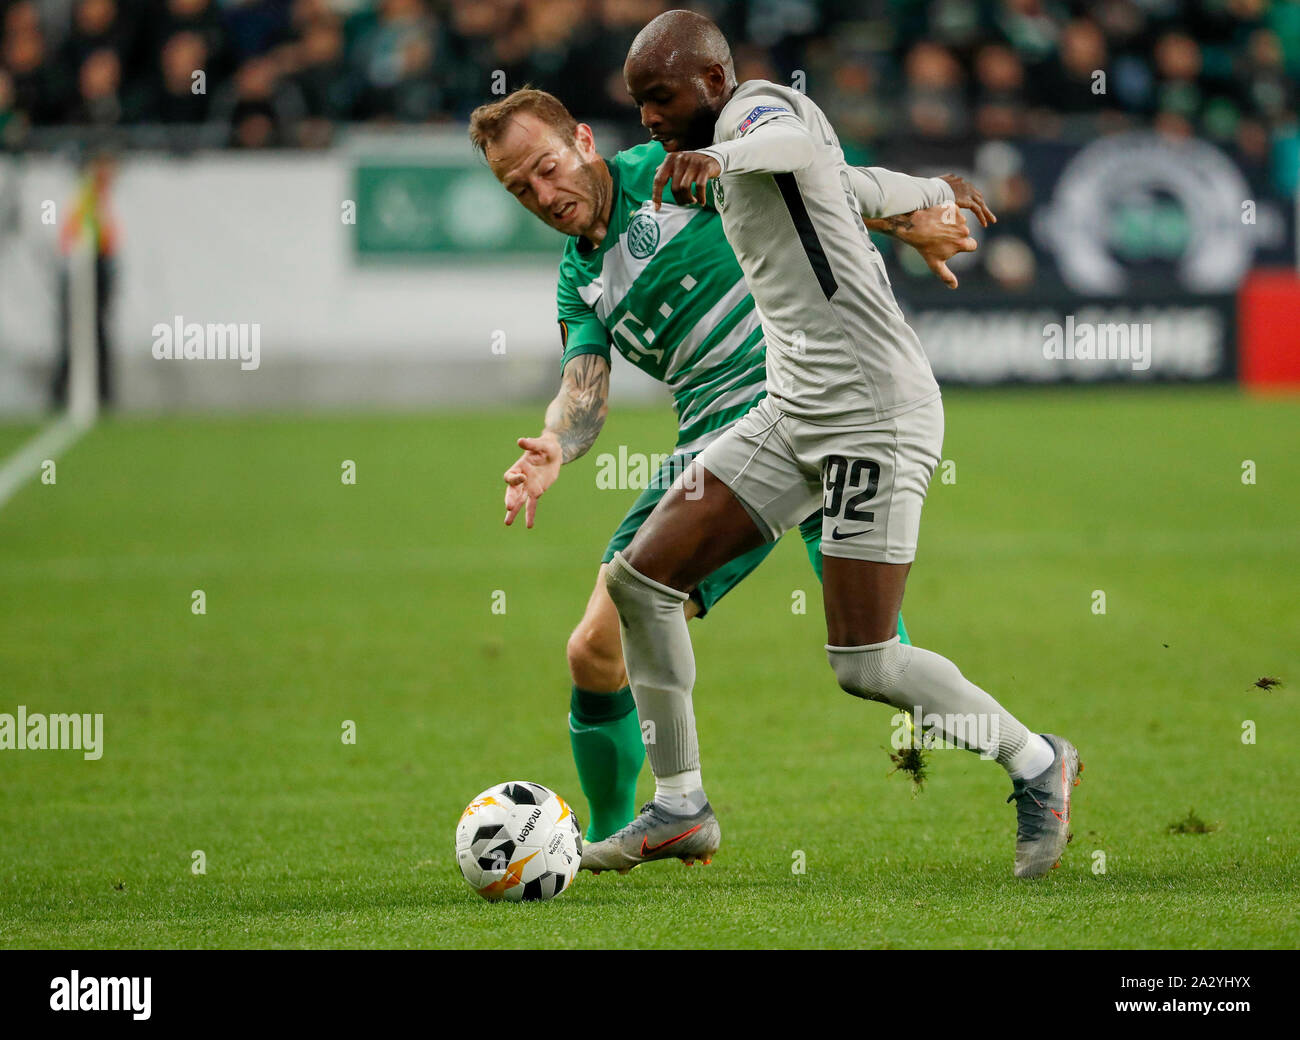 BUDAPEST, HUNGARY - OCTOBER 3: (l-r) Gergo Lovrencsics of Ferencvarosi TC competes for the ball with Jody Lukoki of PFC Ludogorets 1945 during the UEFA Europa League Group Stage match between Ferencvarosi TC and PFC Ludogorets 1945 at Ferencvaros Stadium on October 3, 2019 in Budapest, Hungary. Stock Photo